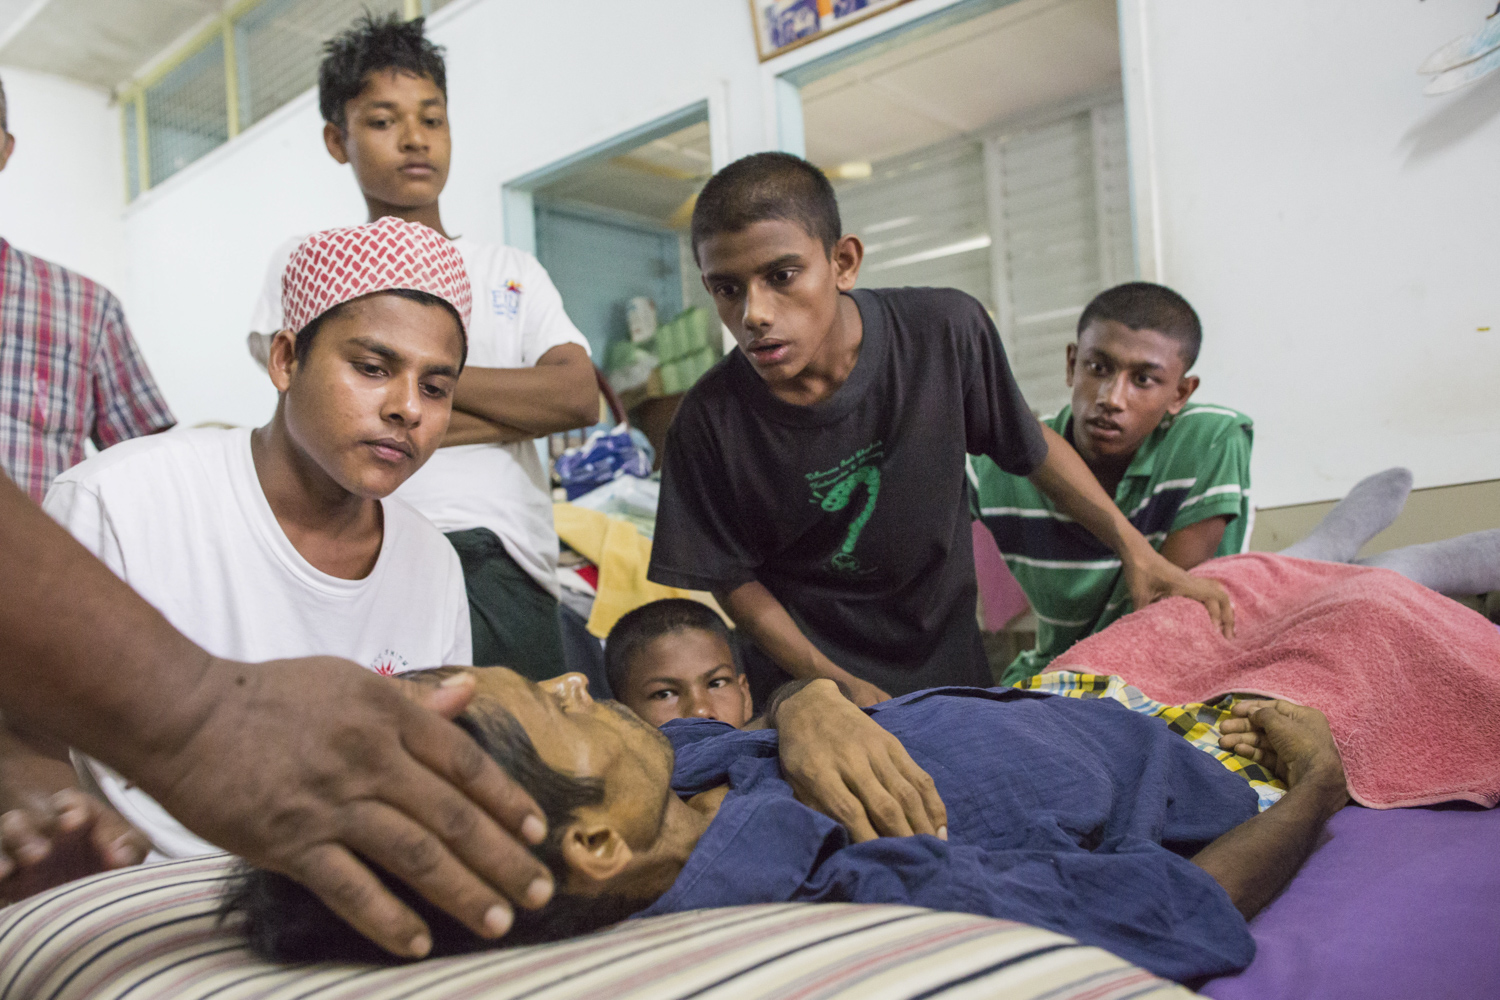 Alex and the Rohingya boys watching over Rashedul as his blood pressure drops dangerously low. Rashedul was terminally ill with liver cancer, and needed palliative care.